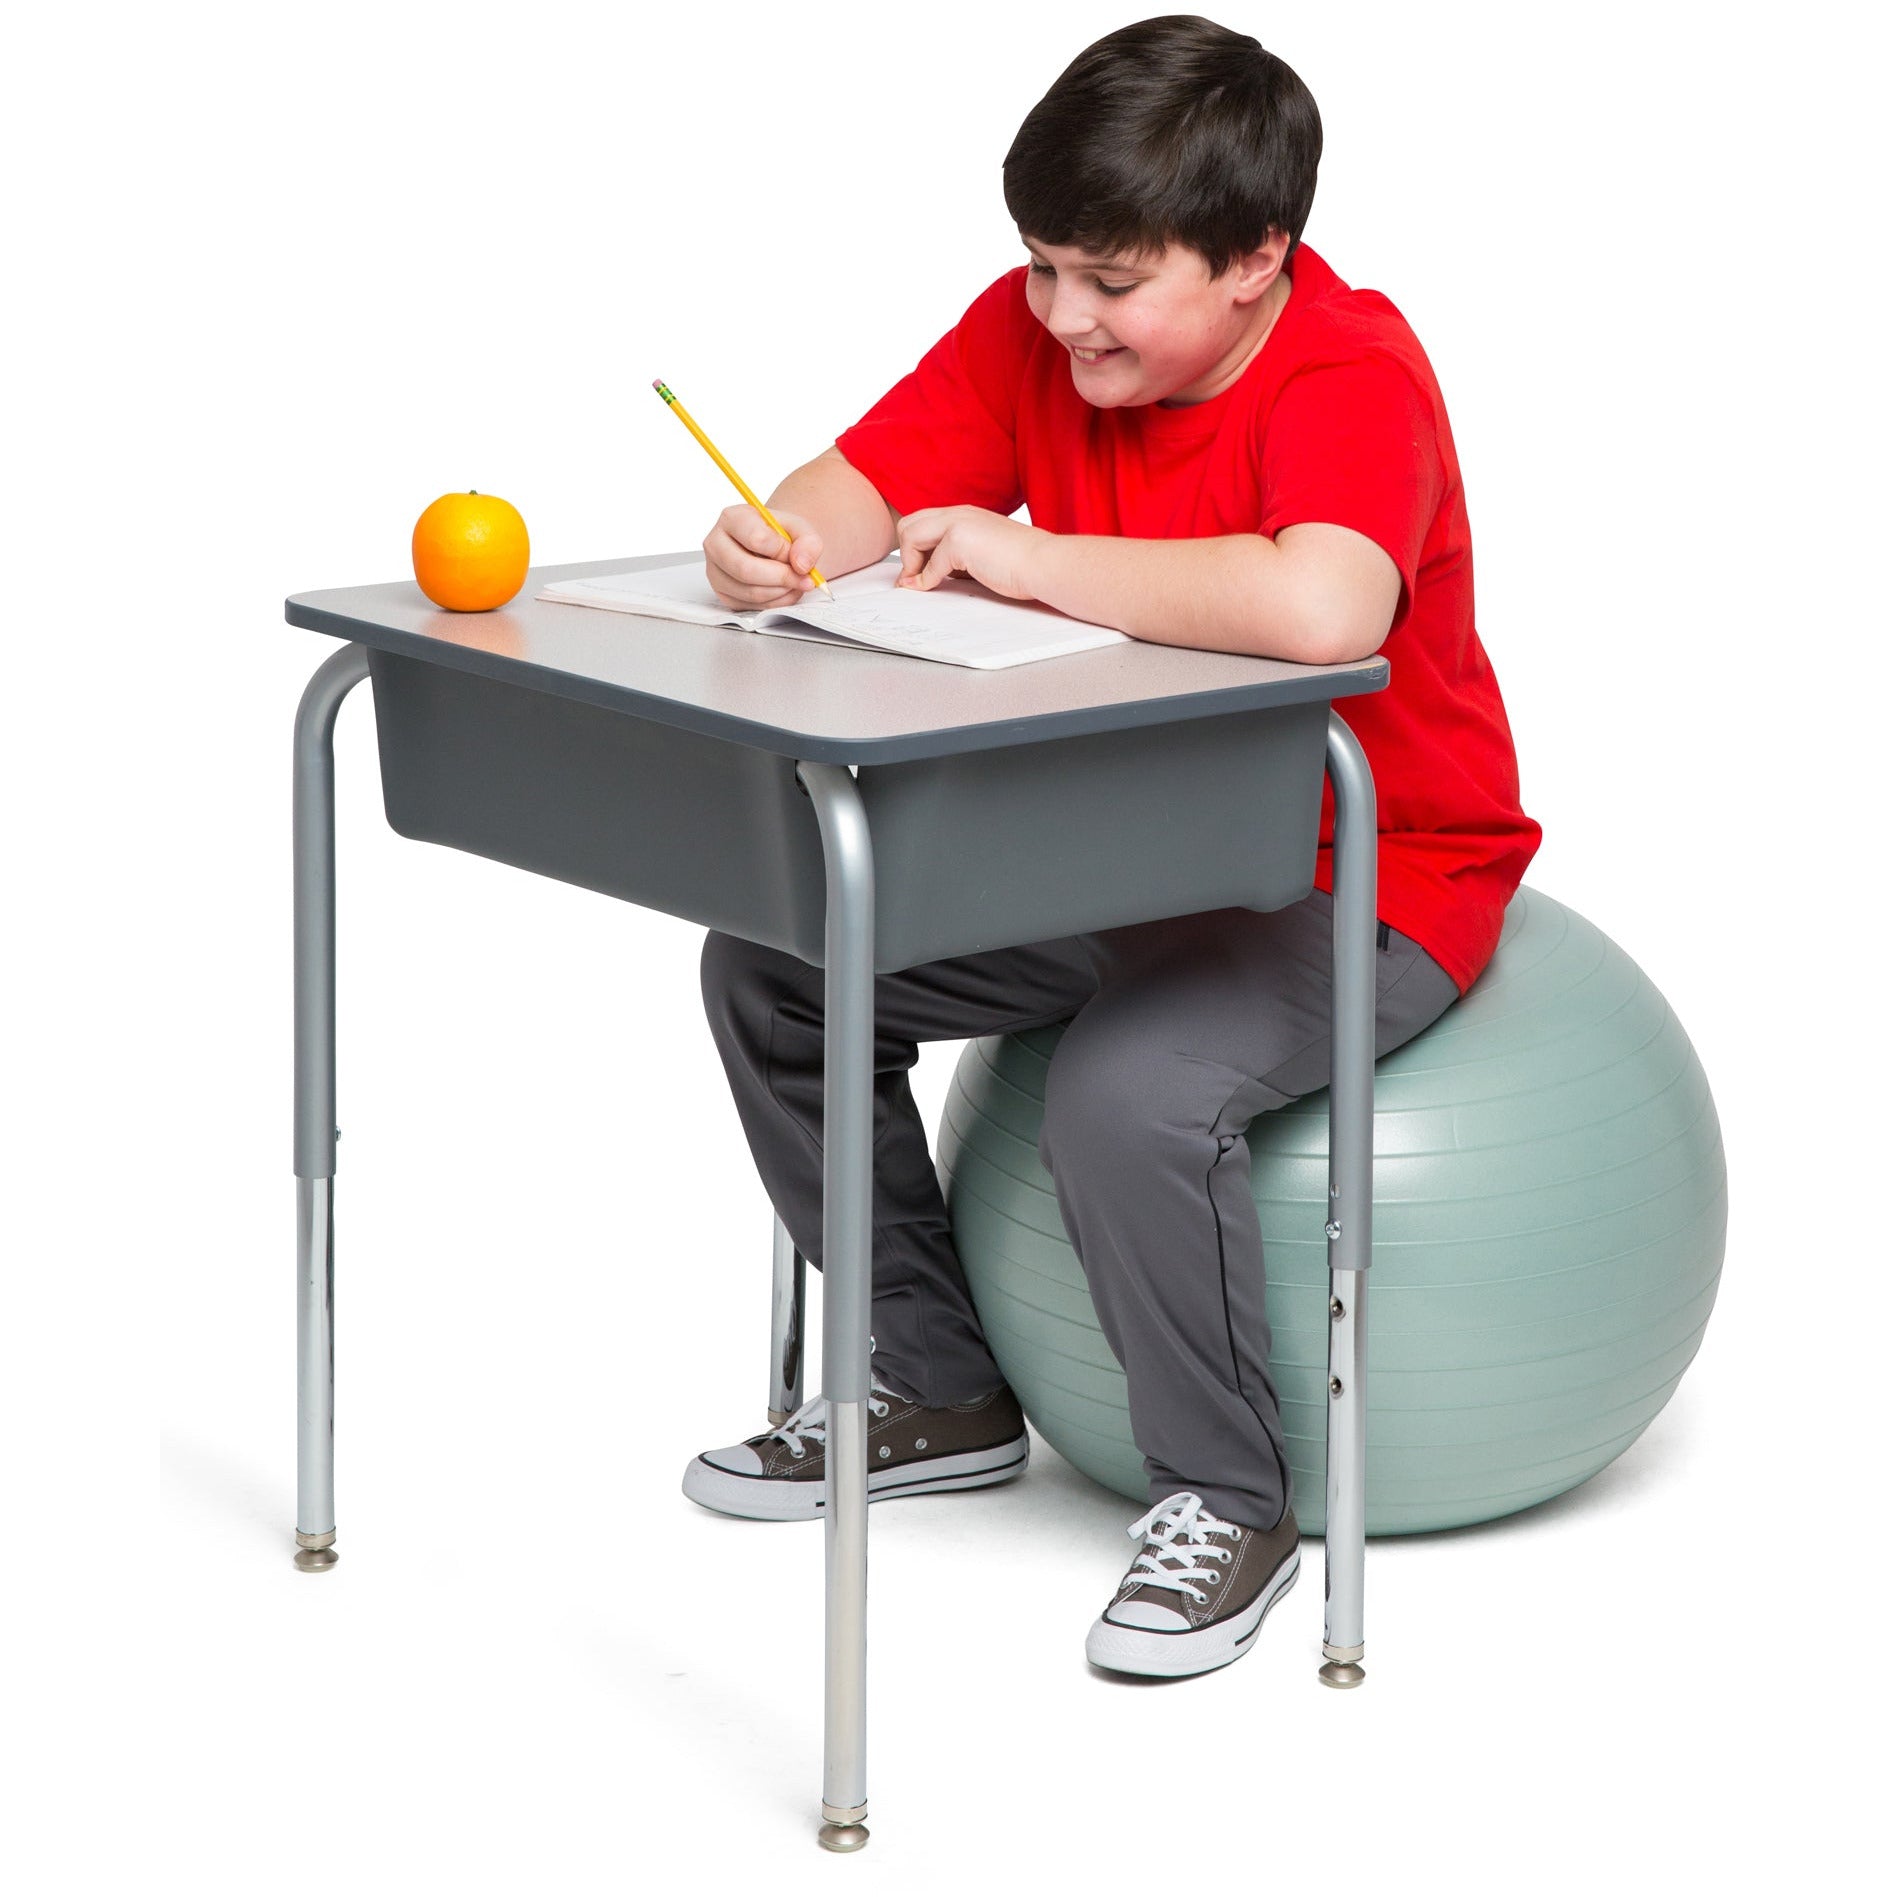 Bouncyband® 55cm Balance Ball No-Roll Weighted Seat-Silver